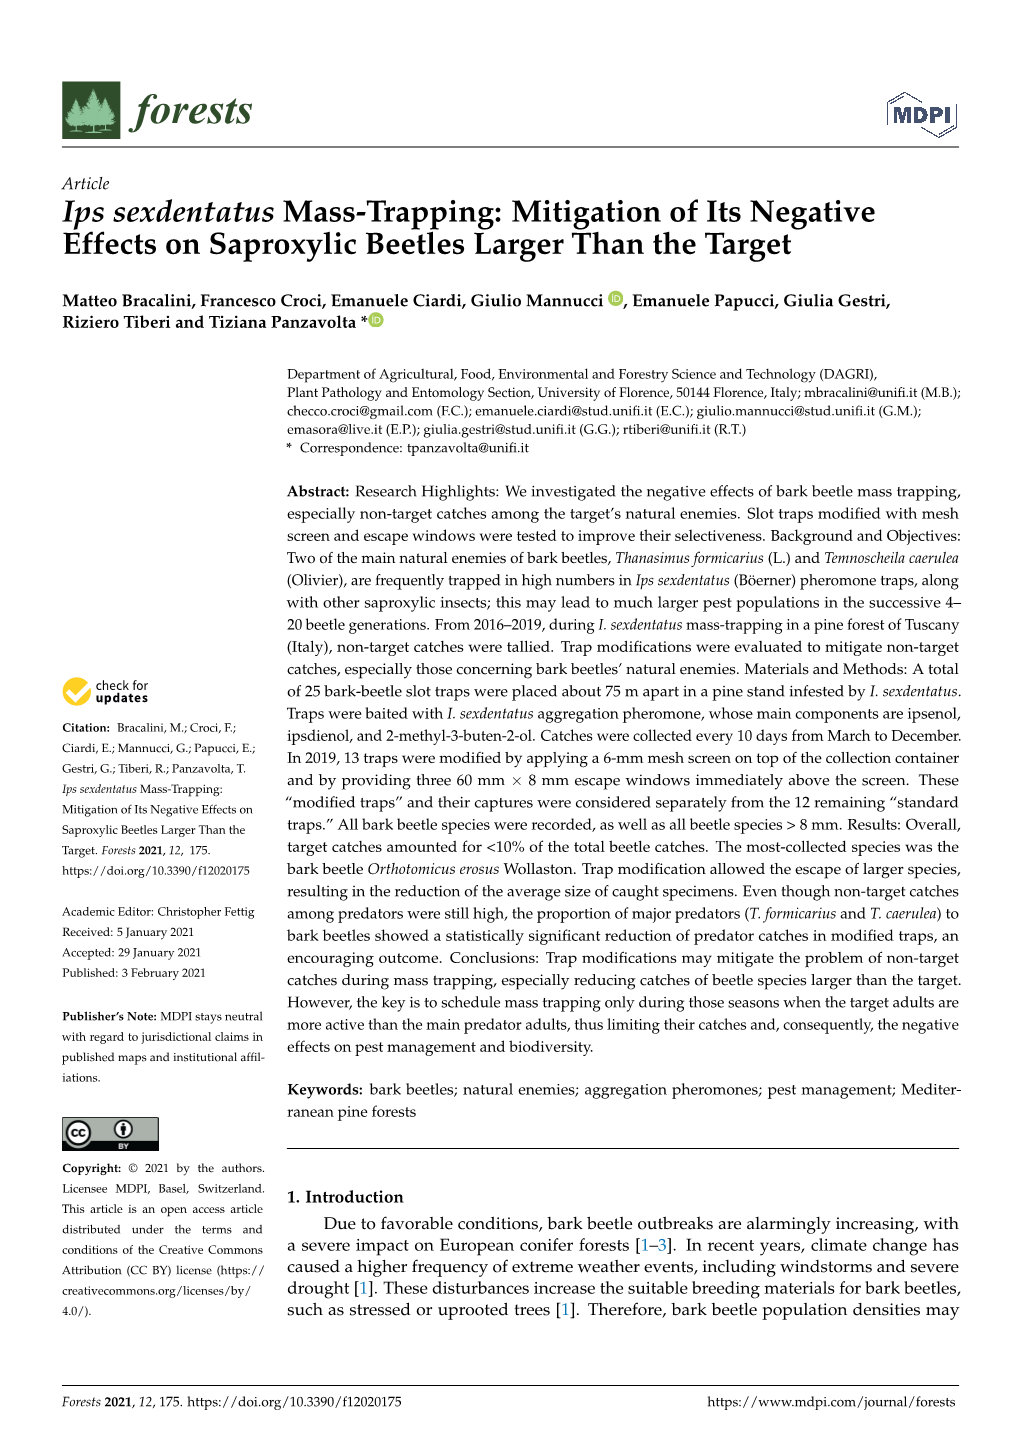 Ips Sexdentatus Mass-Trapping: Mitigation of Its Negative Effects on Saproxylic Beetles Larger Than the Target